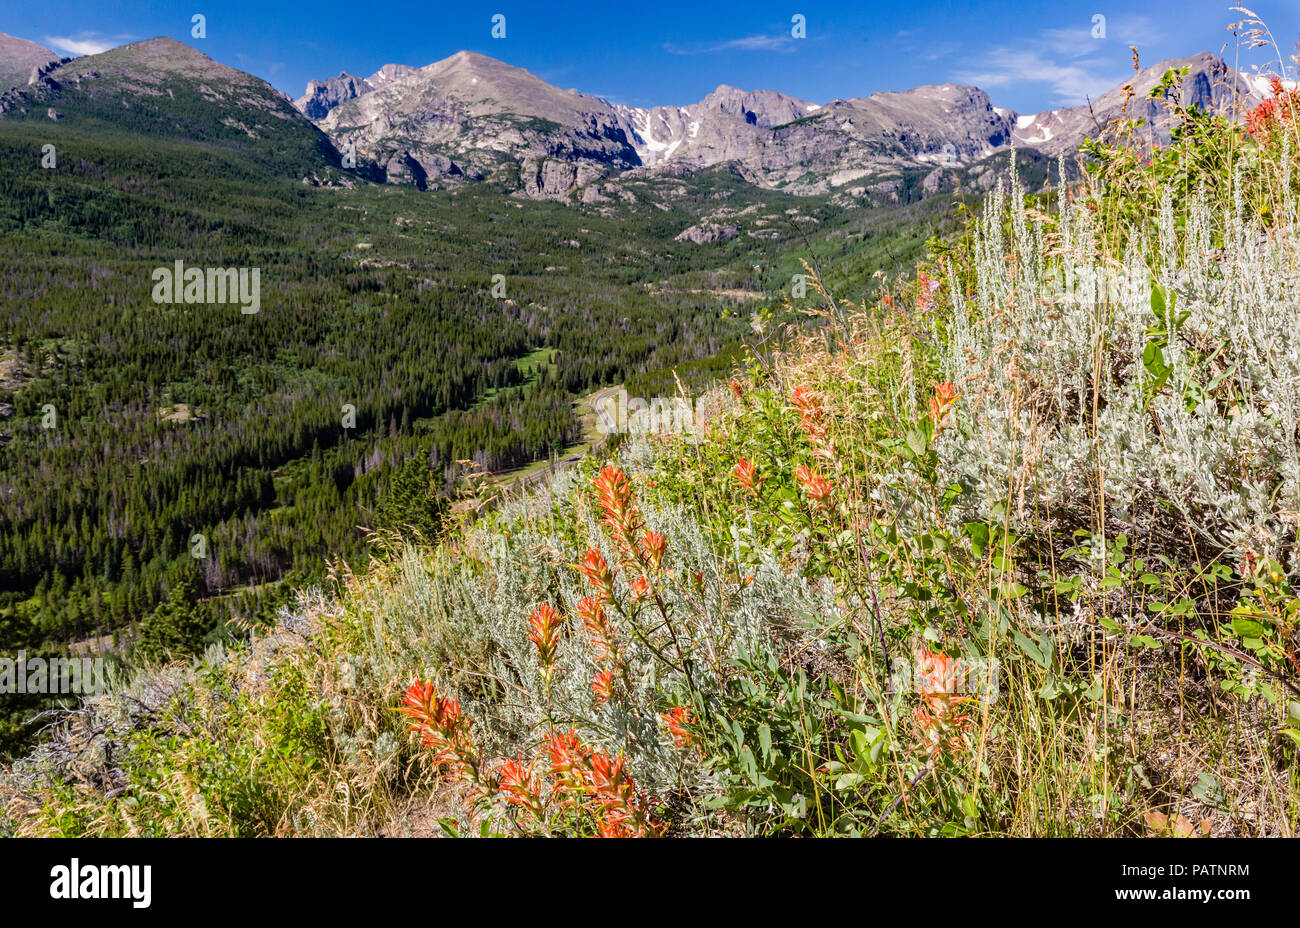 Indian Paintbrush wildflowers line the steep mountainside on Bierstadt Moraine, overlooking the Continental Divide in Rocky Mountain National Park, Co Stock Photo